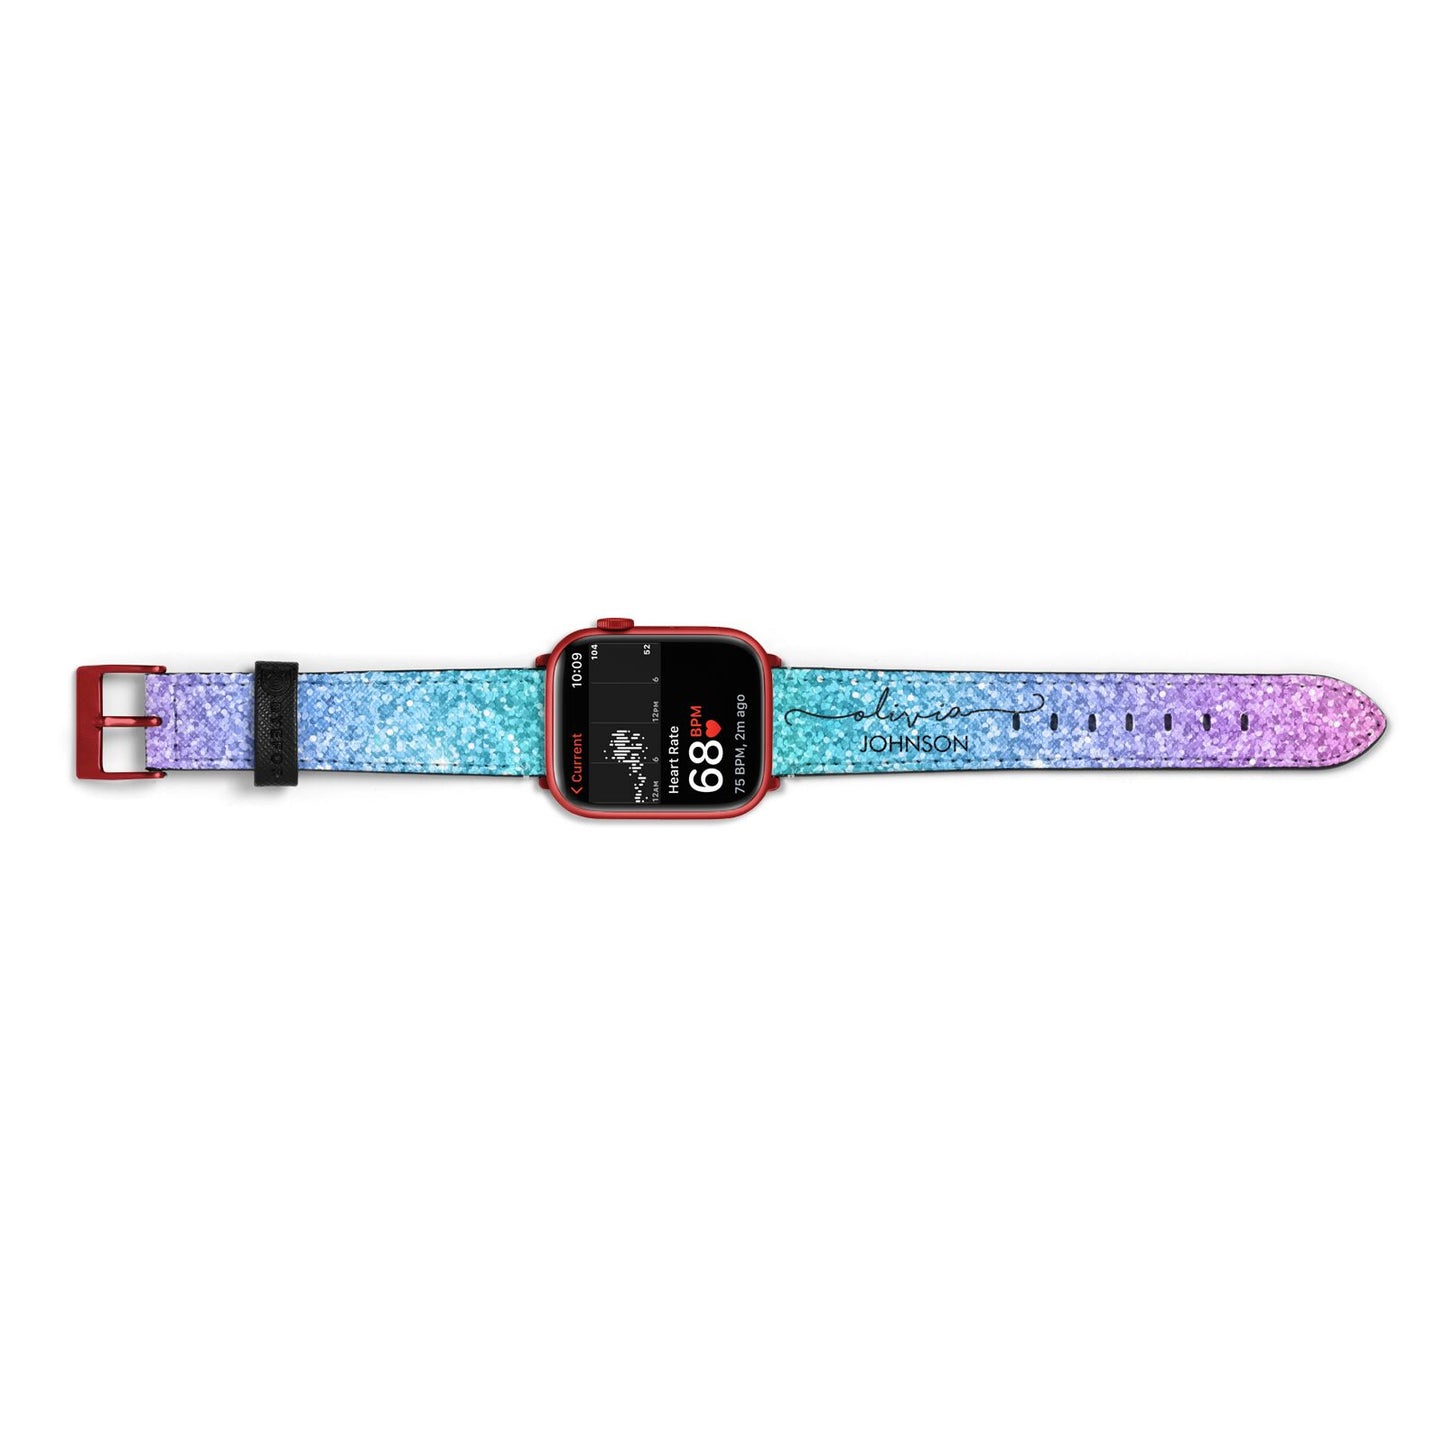 Personalised Ombre Glitter with Names Apple Watch Strap Size 38mm Landscape Image Red Hardware